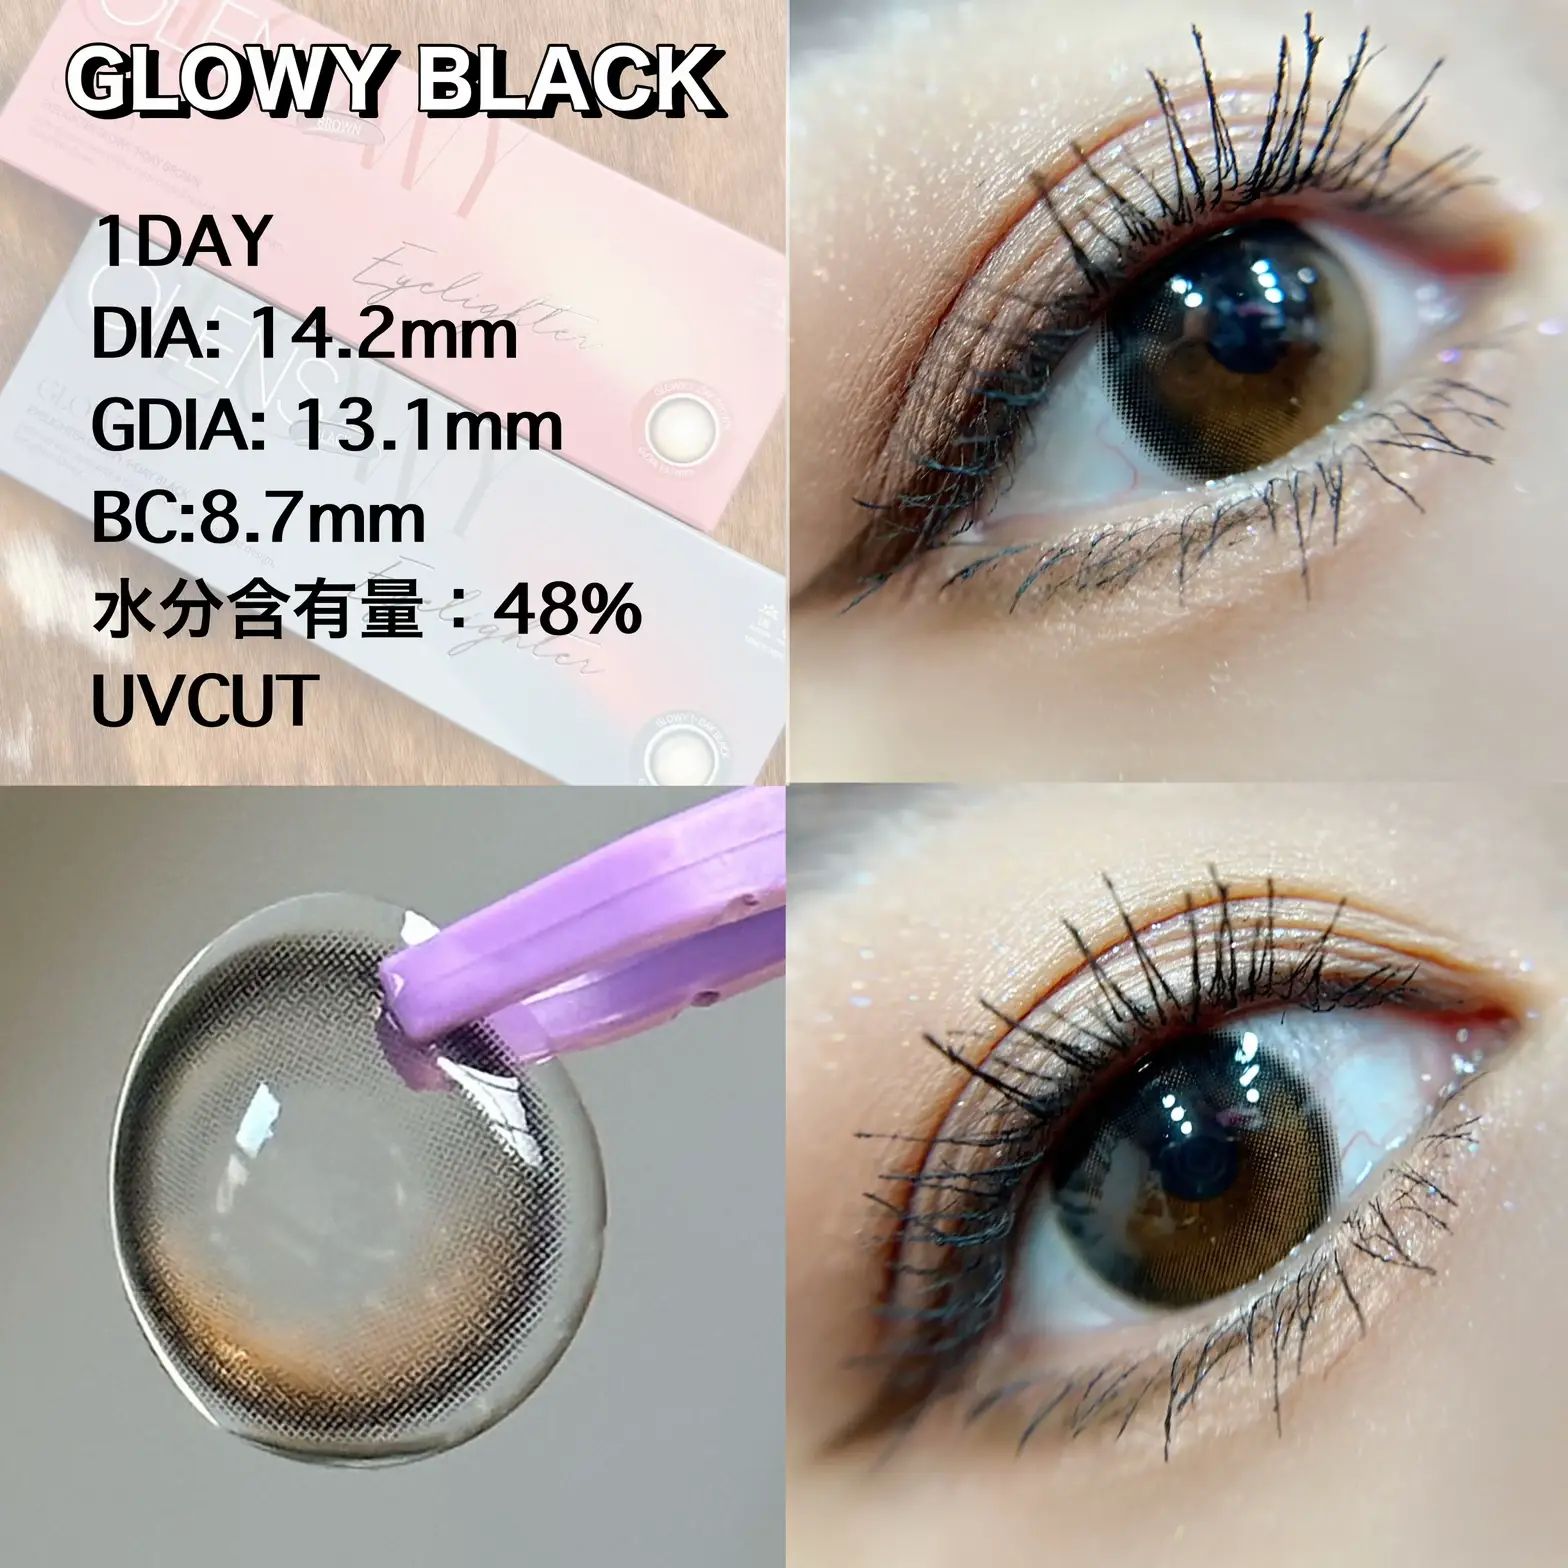 Comparison of GLOWY series and BIG series | Gallery posted by